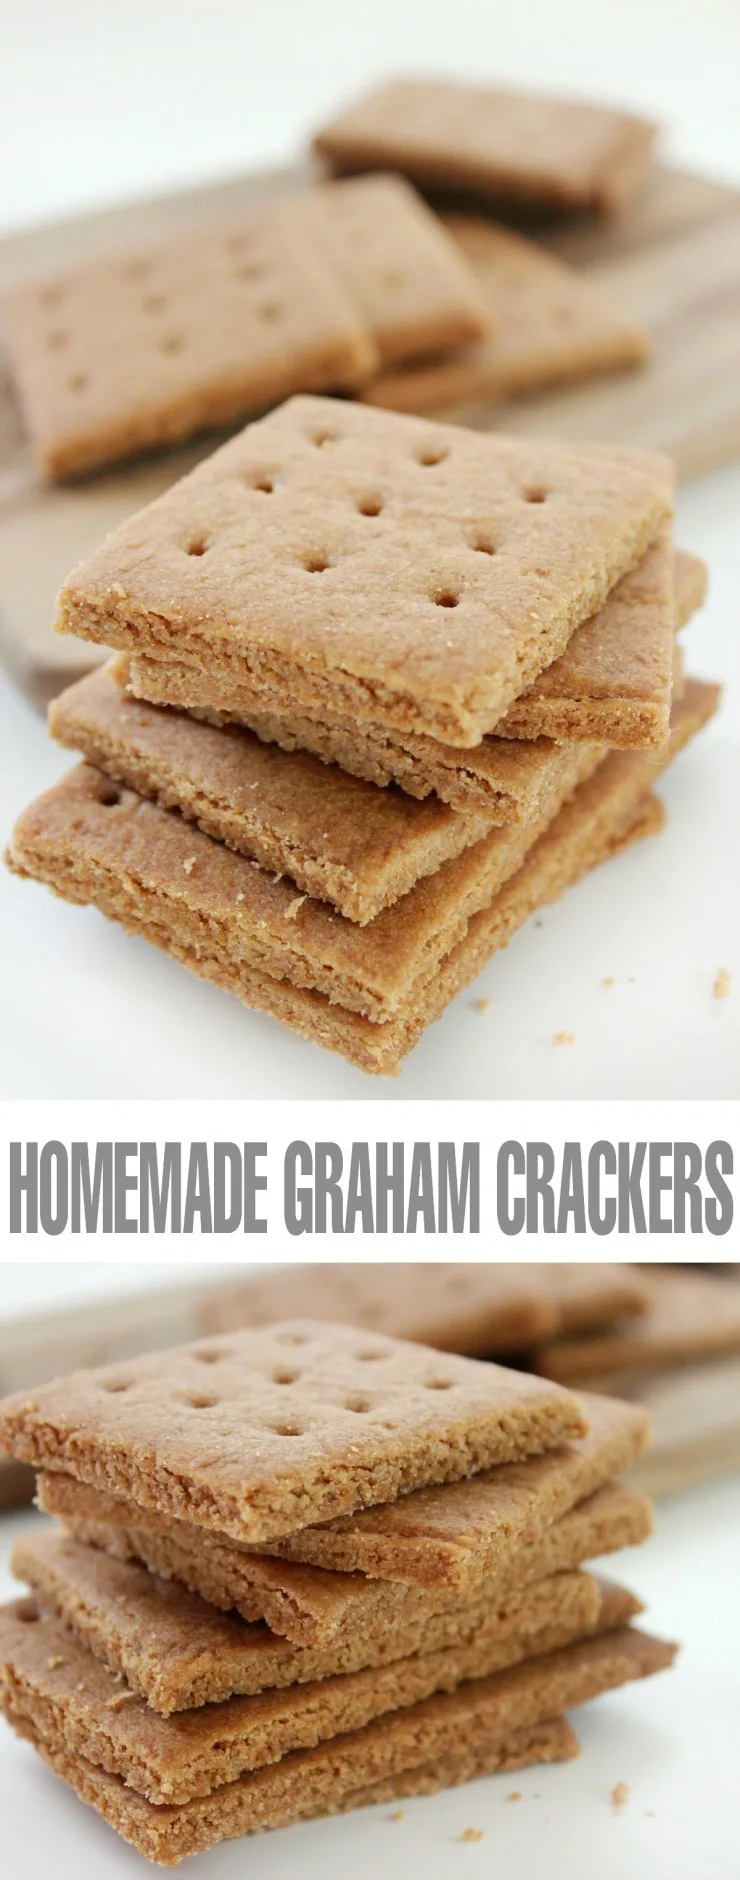  These Homemade Graham Crackers taste so good you may never go back to store bought again. Use them for s'mores, in baking or even just enjoy alone!